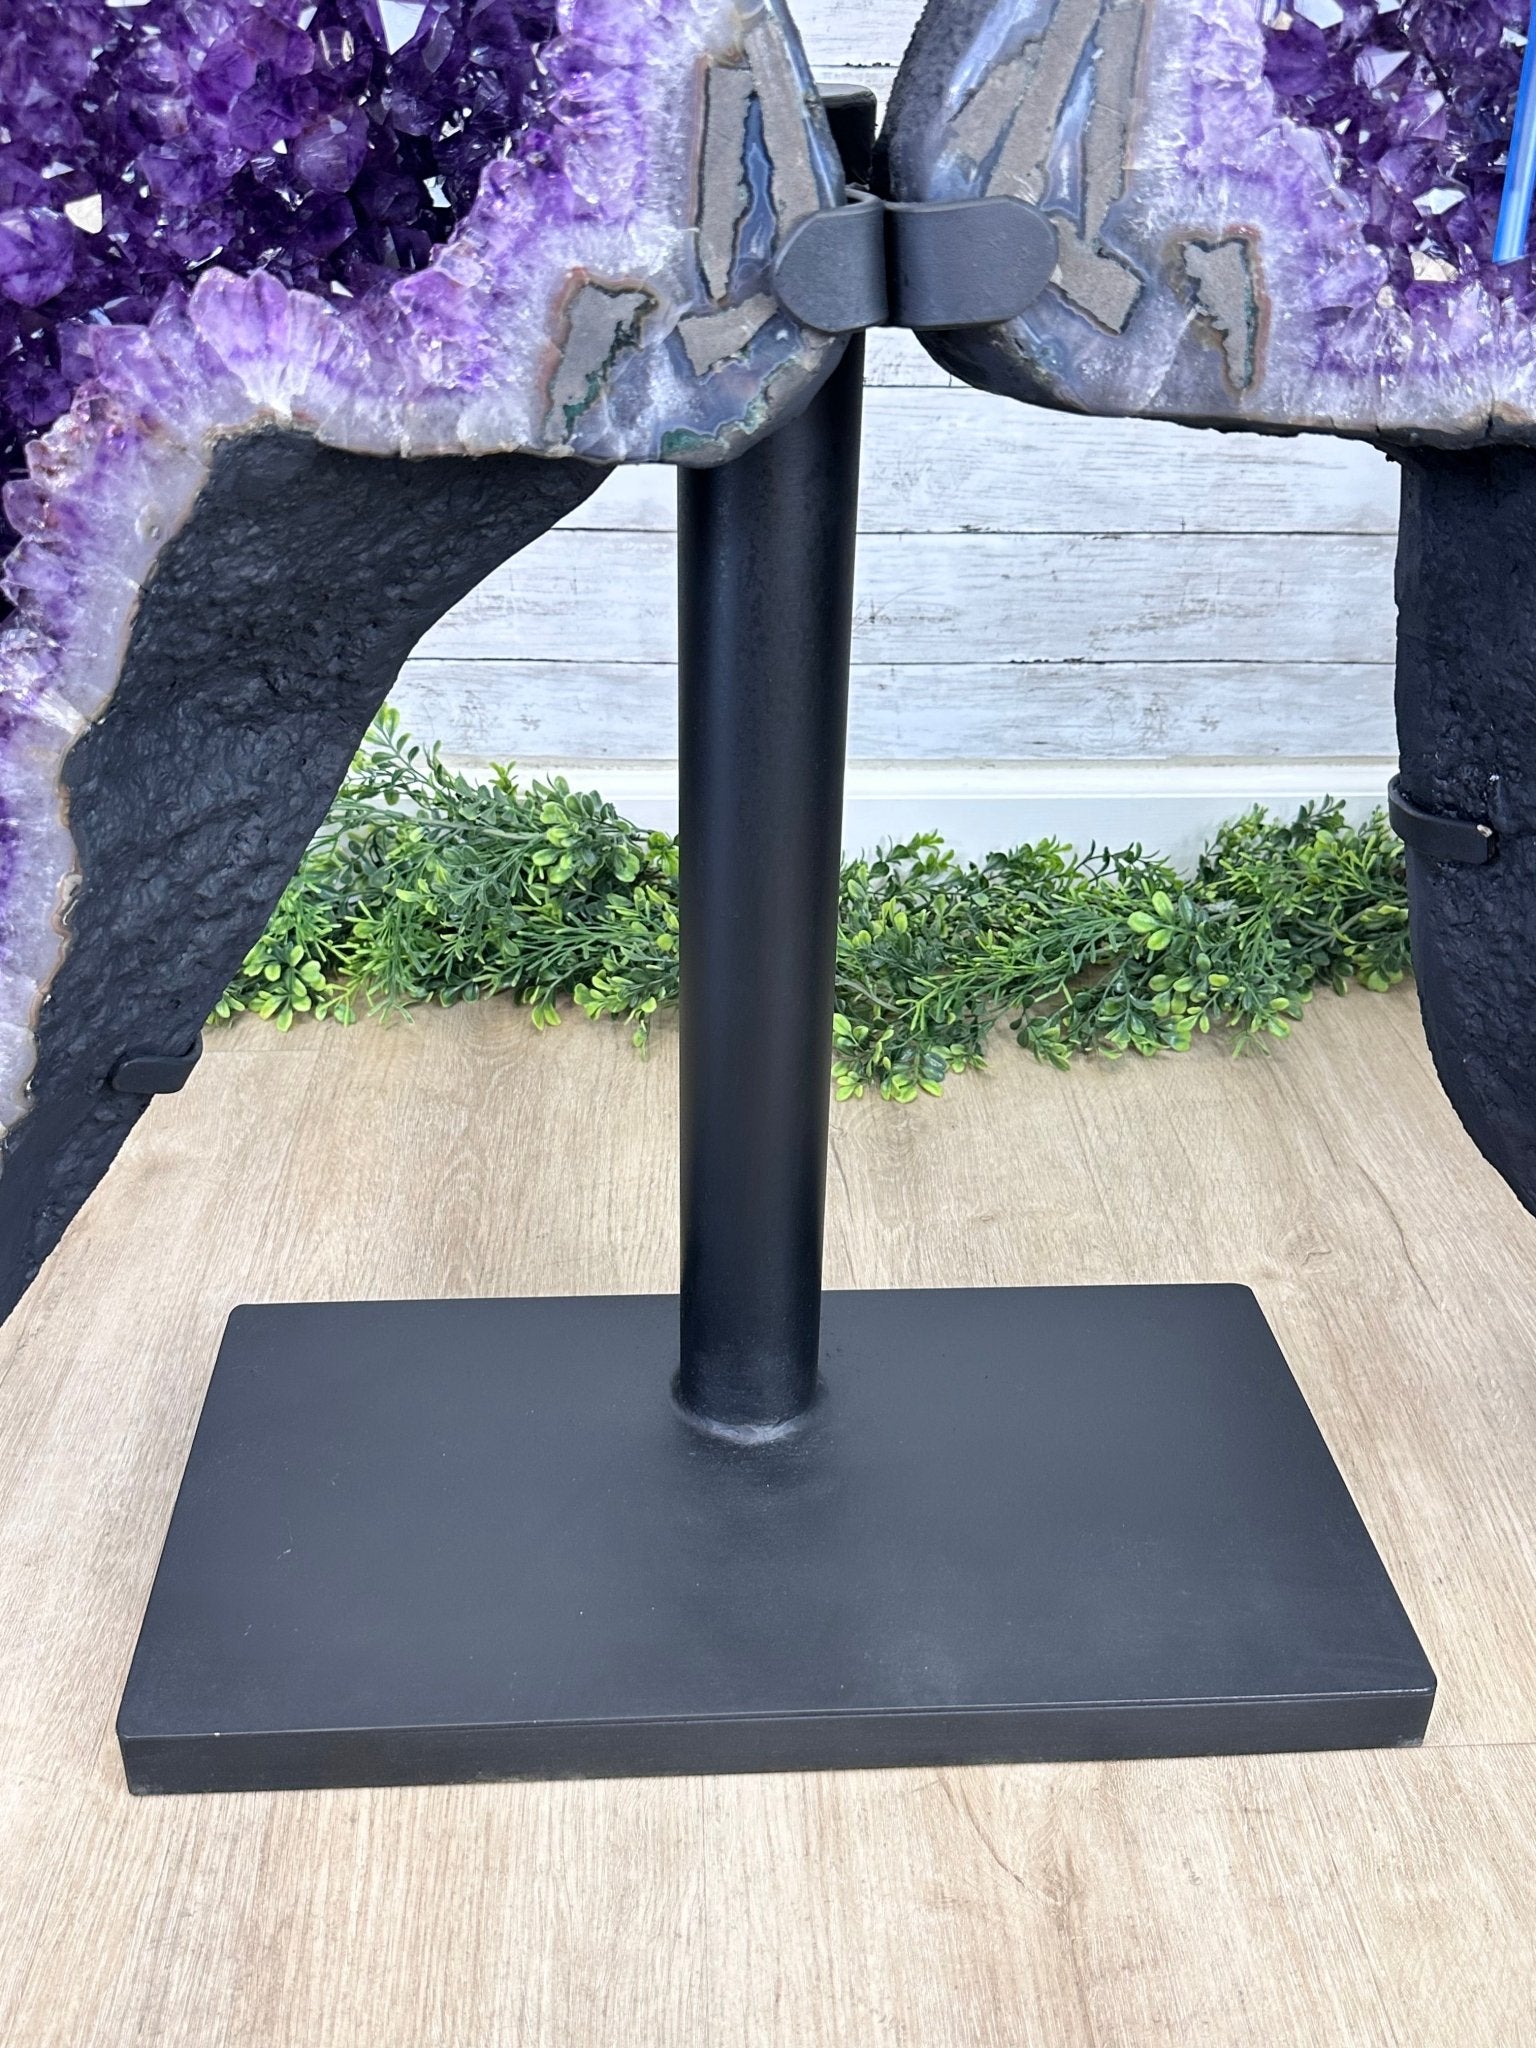 Extra Plus Quality Amethyst Wings on a Metal Stand, 178 lbs, 36" Tall #5493-0040 - Brazil GemsBrazil GemsExtra Plus Quality Amethyst Wings on a Metal Stand, 178 lbs, 36" Tall #5493-0040Amethyst Butterfly Wings5493-0040